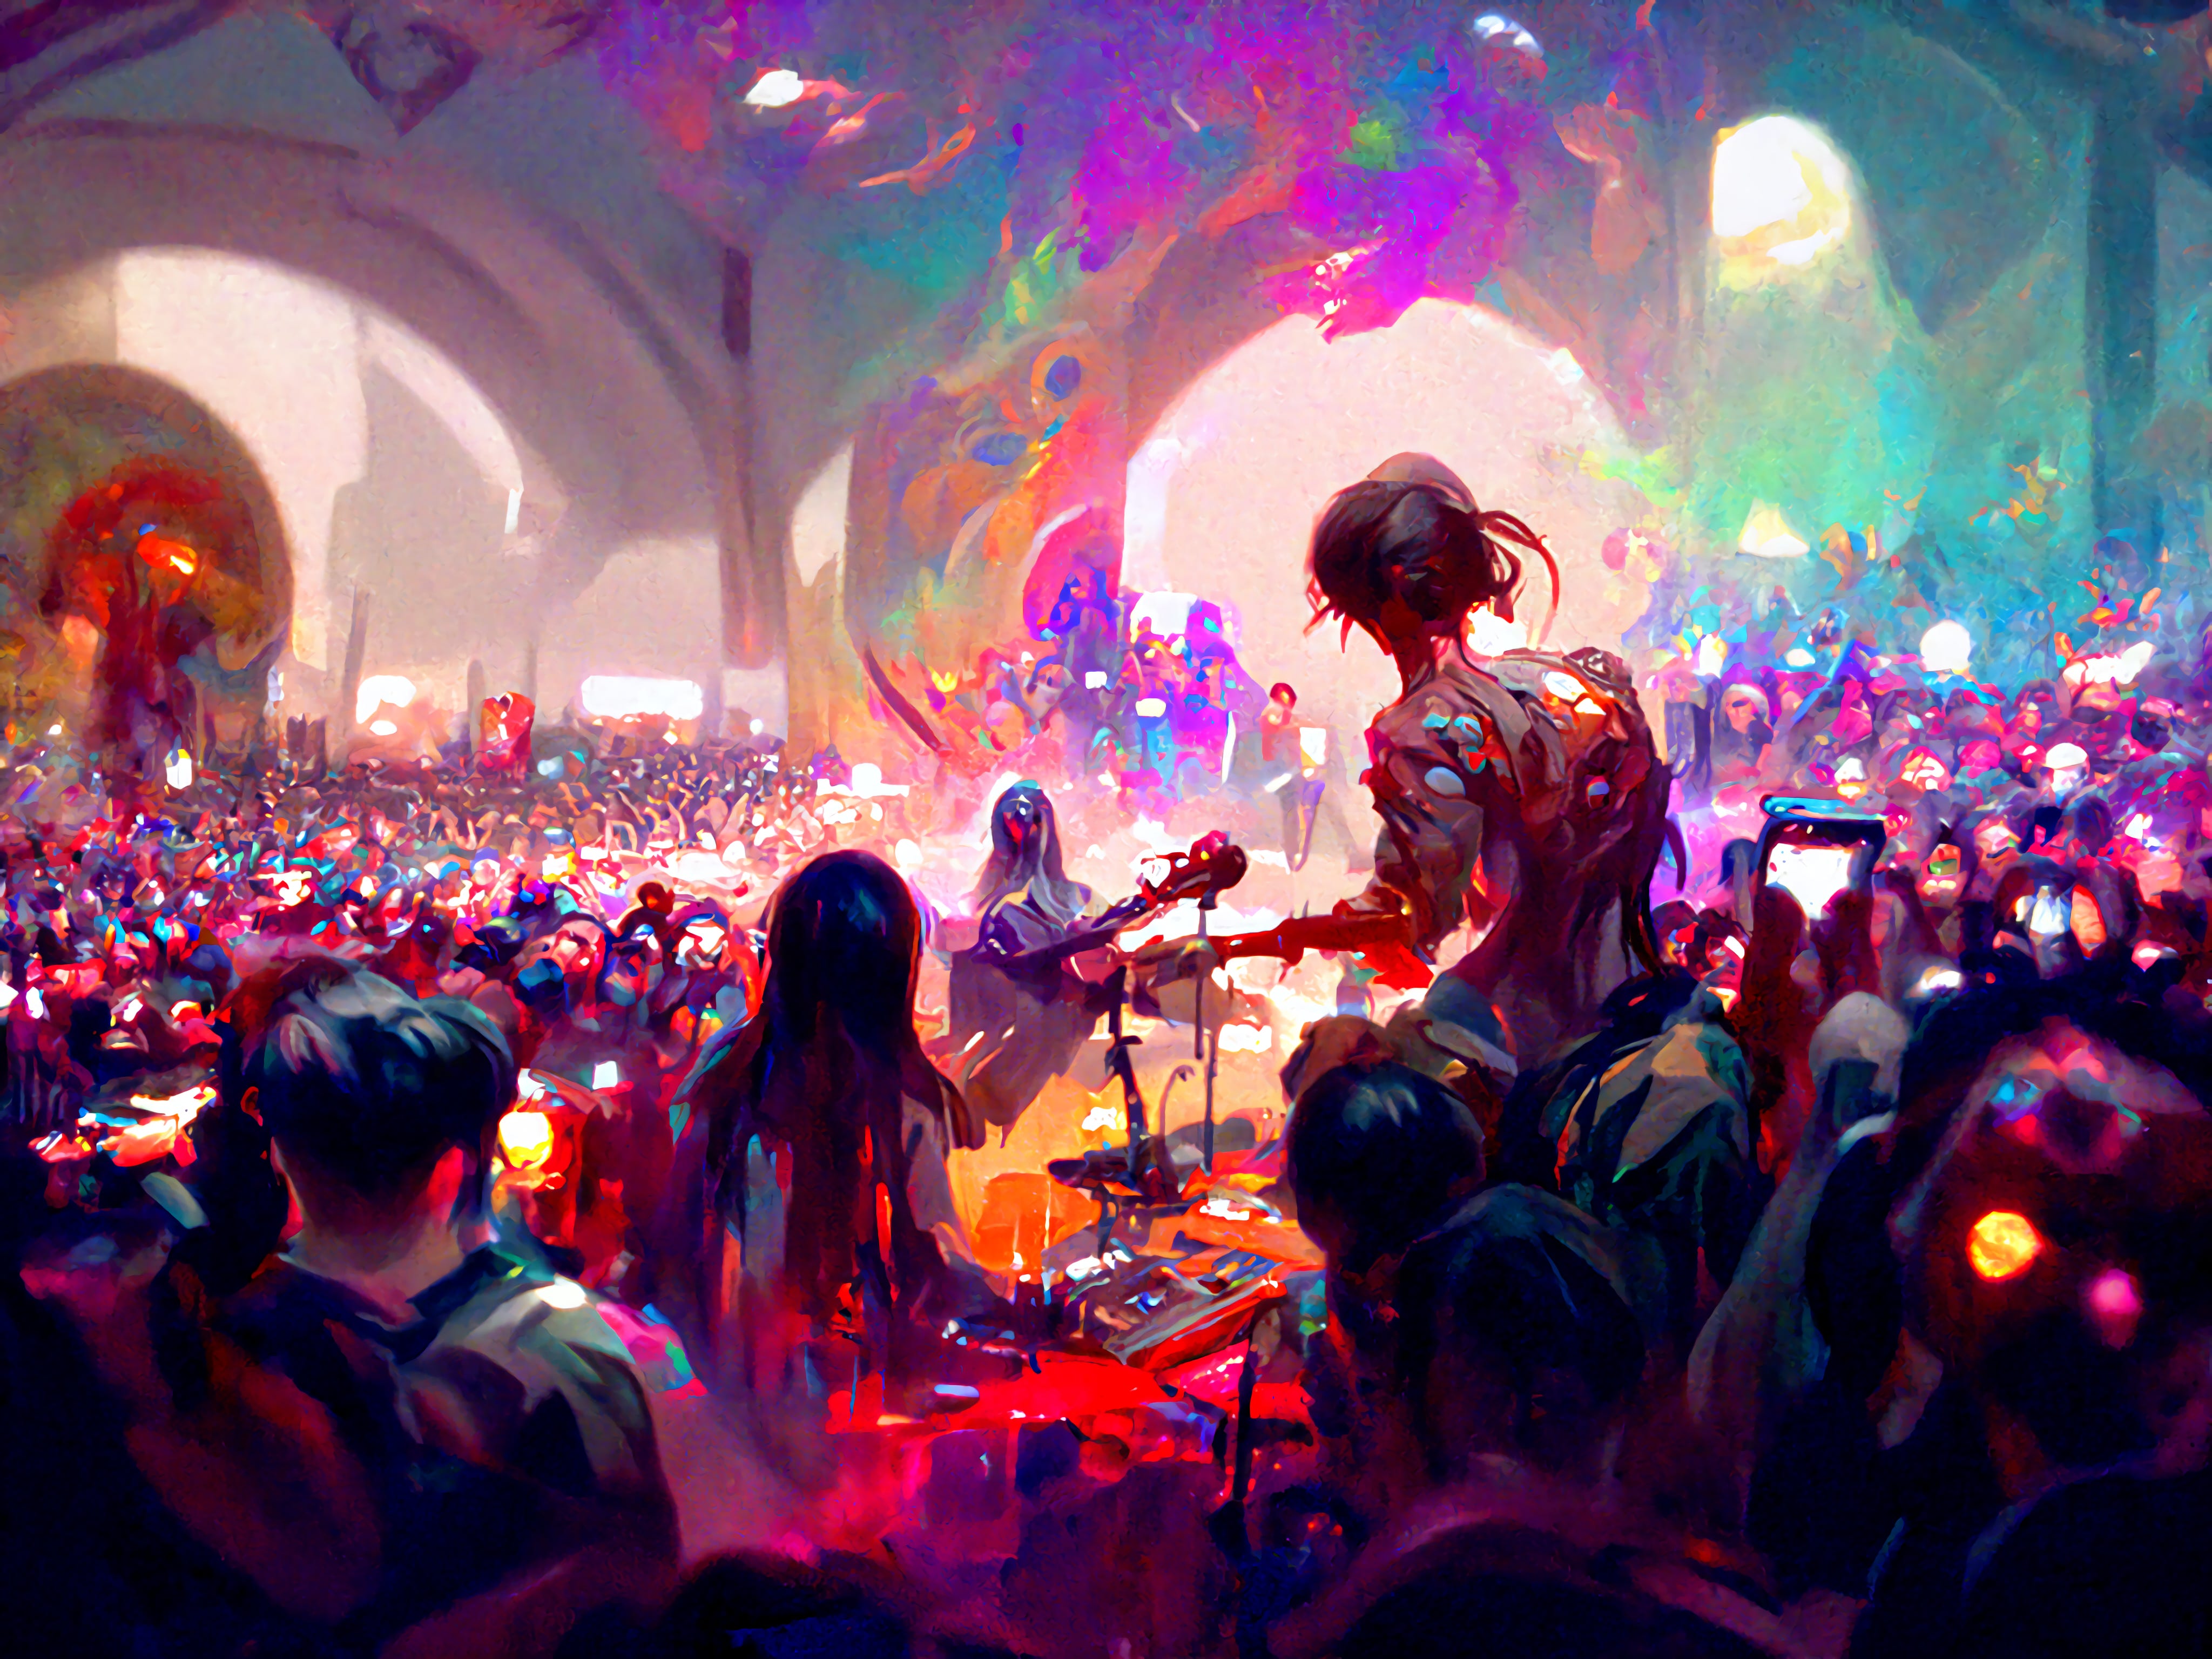 A psychedelic painting of a futuristic concert with 3D projections